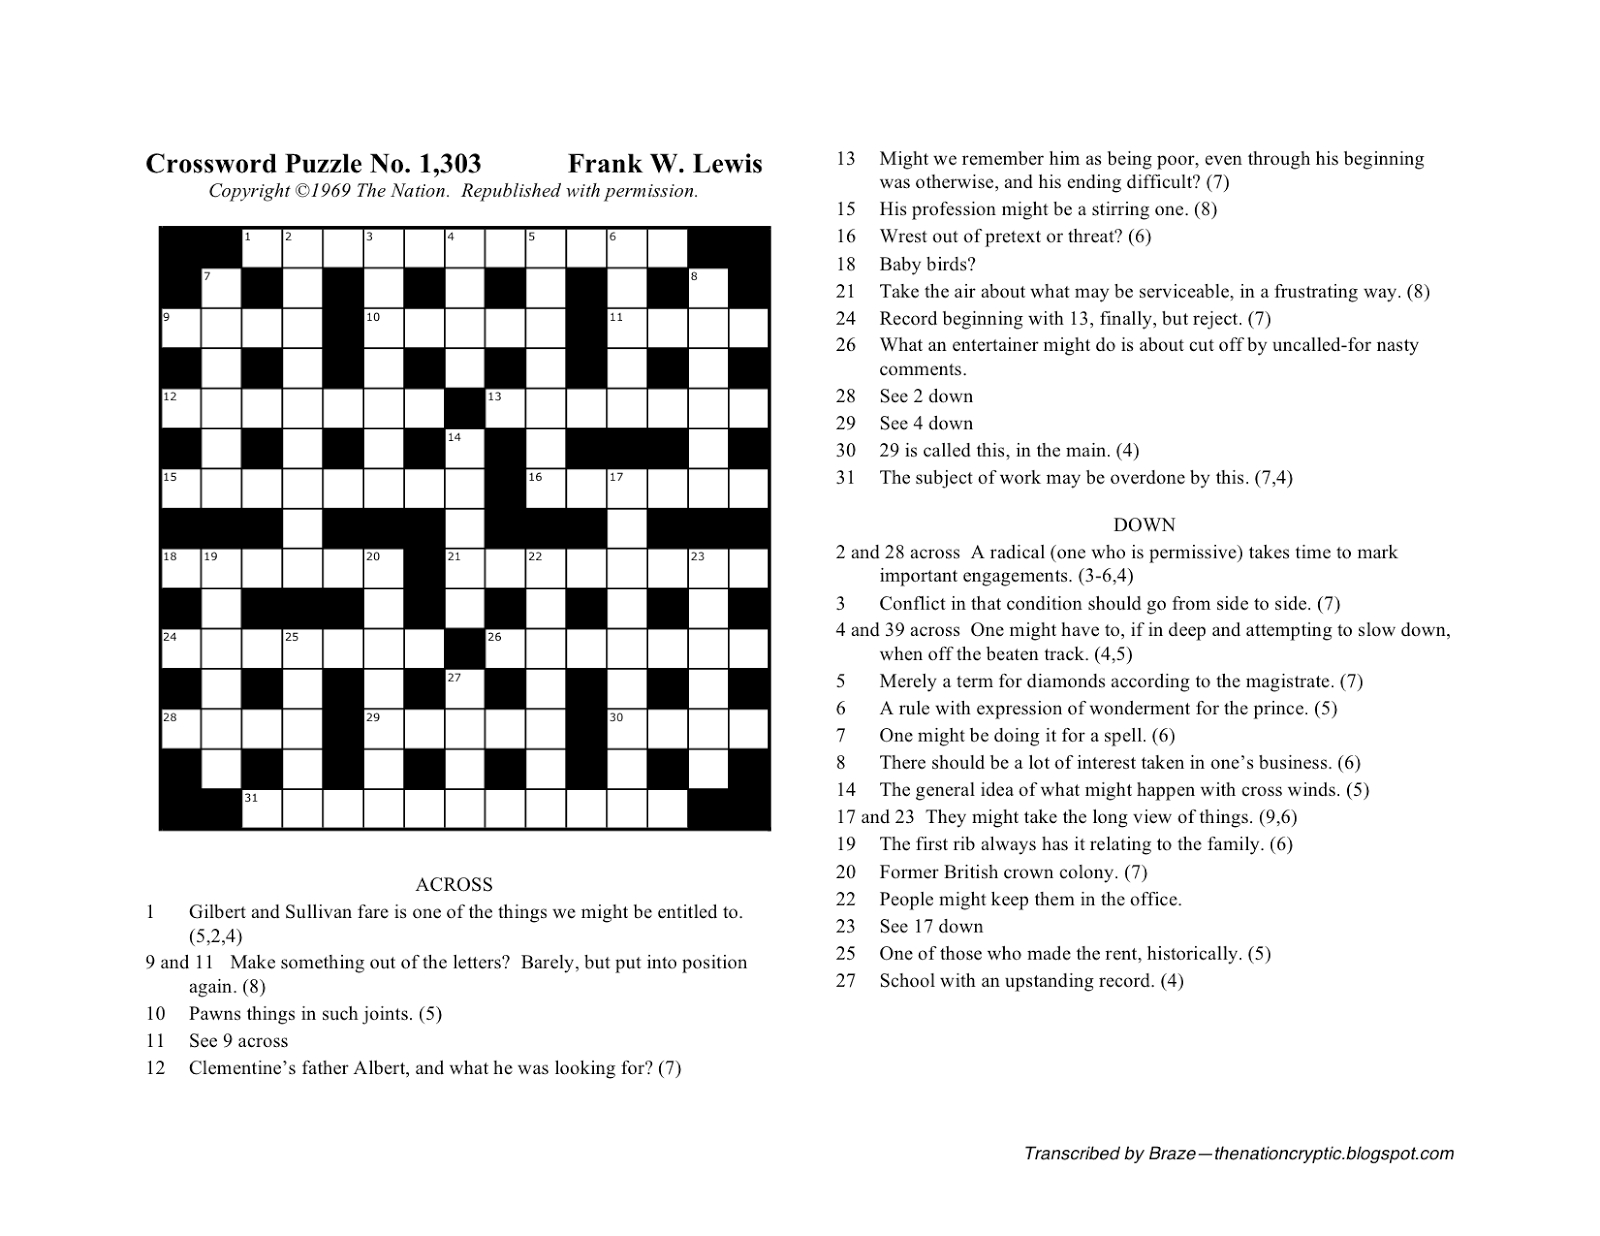 The Nation Cryptic Crossword Forum: Microfilm (Puzzle No. 1,303) - Printable Wall Street Journal Crossword Puzzle